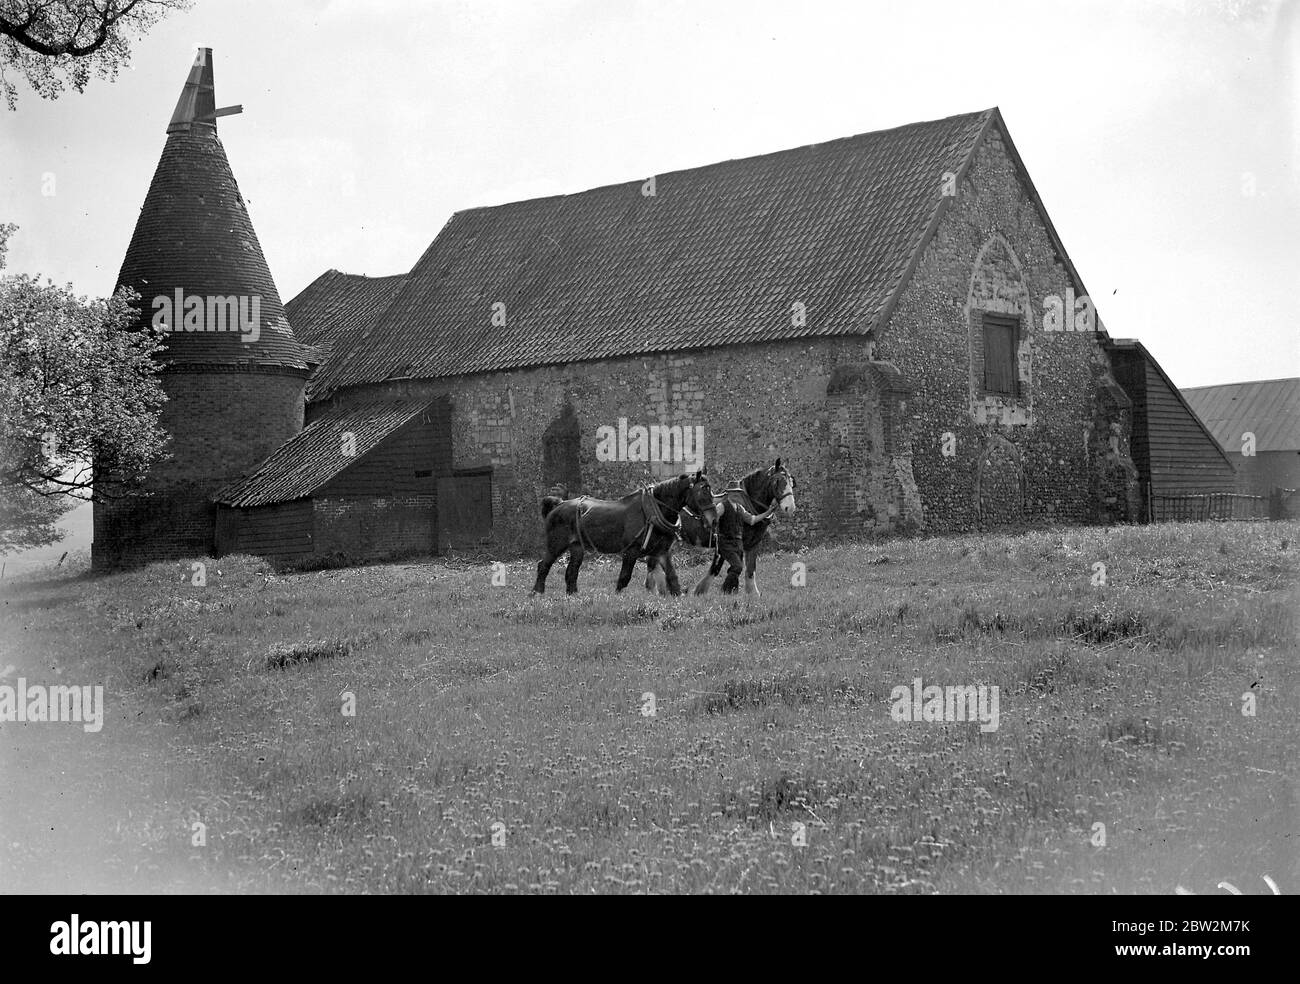 Horses on a field in front of a Barn Church with oast house / hop kiln. March 1934 Stock Photo